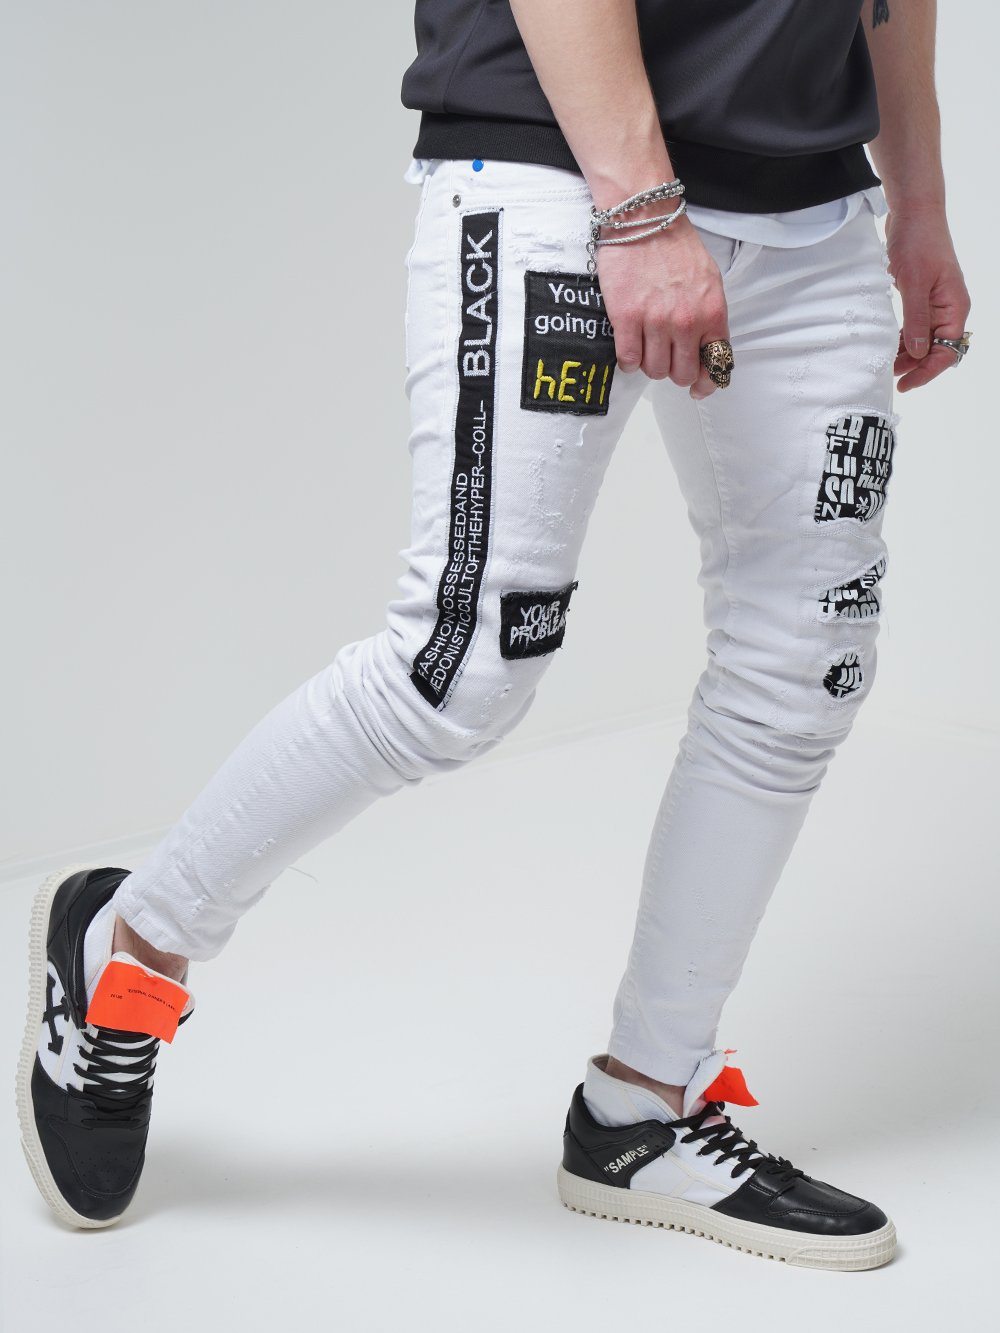 A man wearing WHITE FALCON jeans and black sneakers.